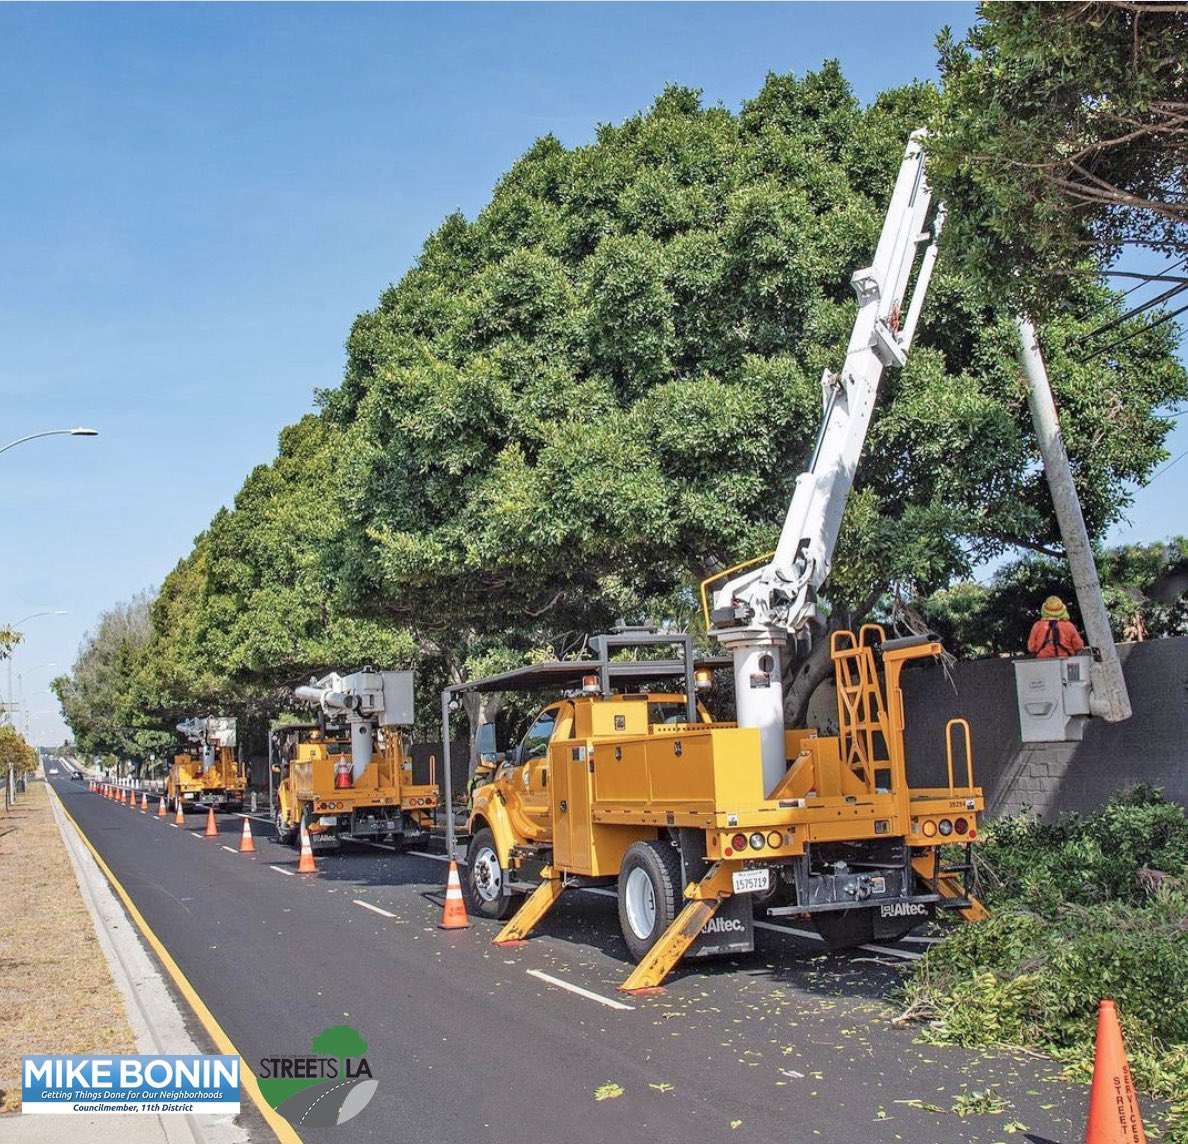 StreetLA’s Urban Forestry crews were busy trimming trees on Manchester Ave from Sepulveda Blvd to Emerson Ave in Westchester. Thank you @BSSLosAngeles for responding to tree emergencies in CD11 and throughout LA. If you see an LA City tree down, please report it by calling 311.